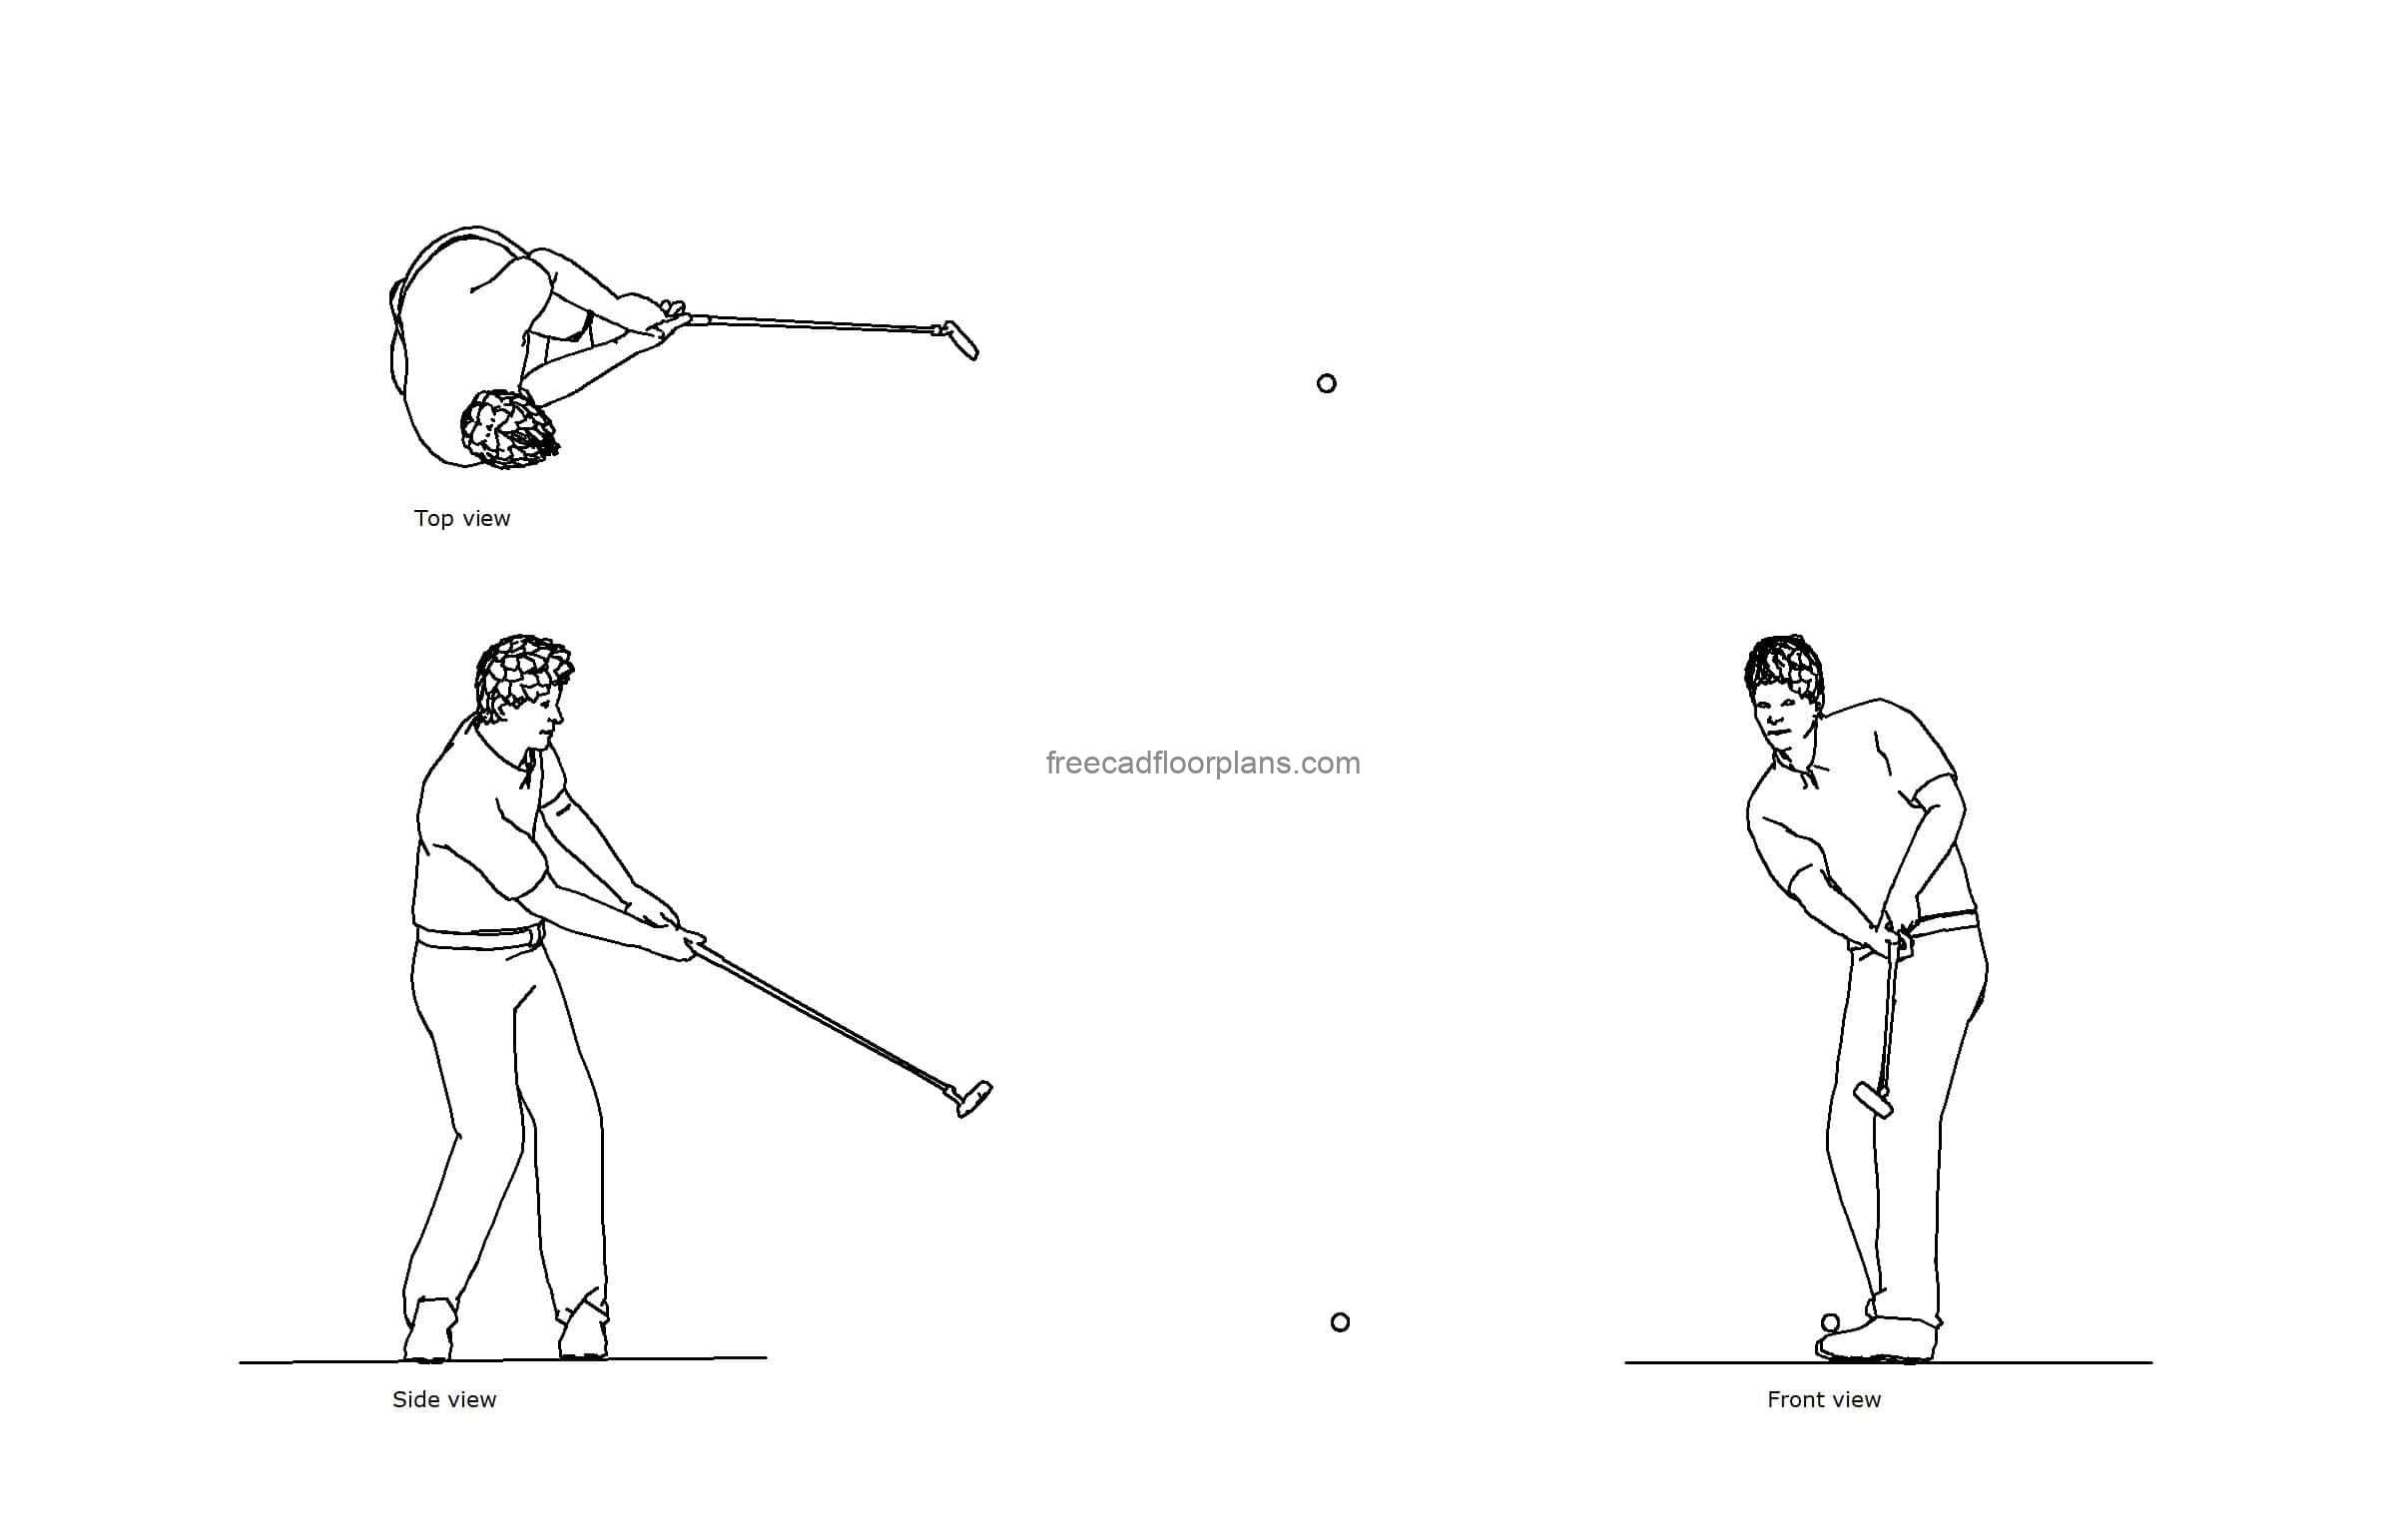 autocad drawing of a man golfing, plan and elevation 2d views, dwg file free for download